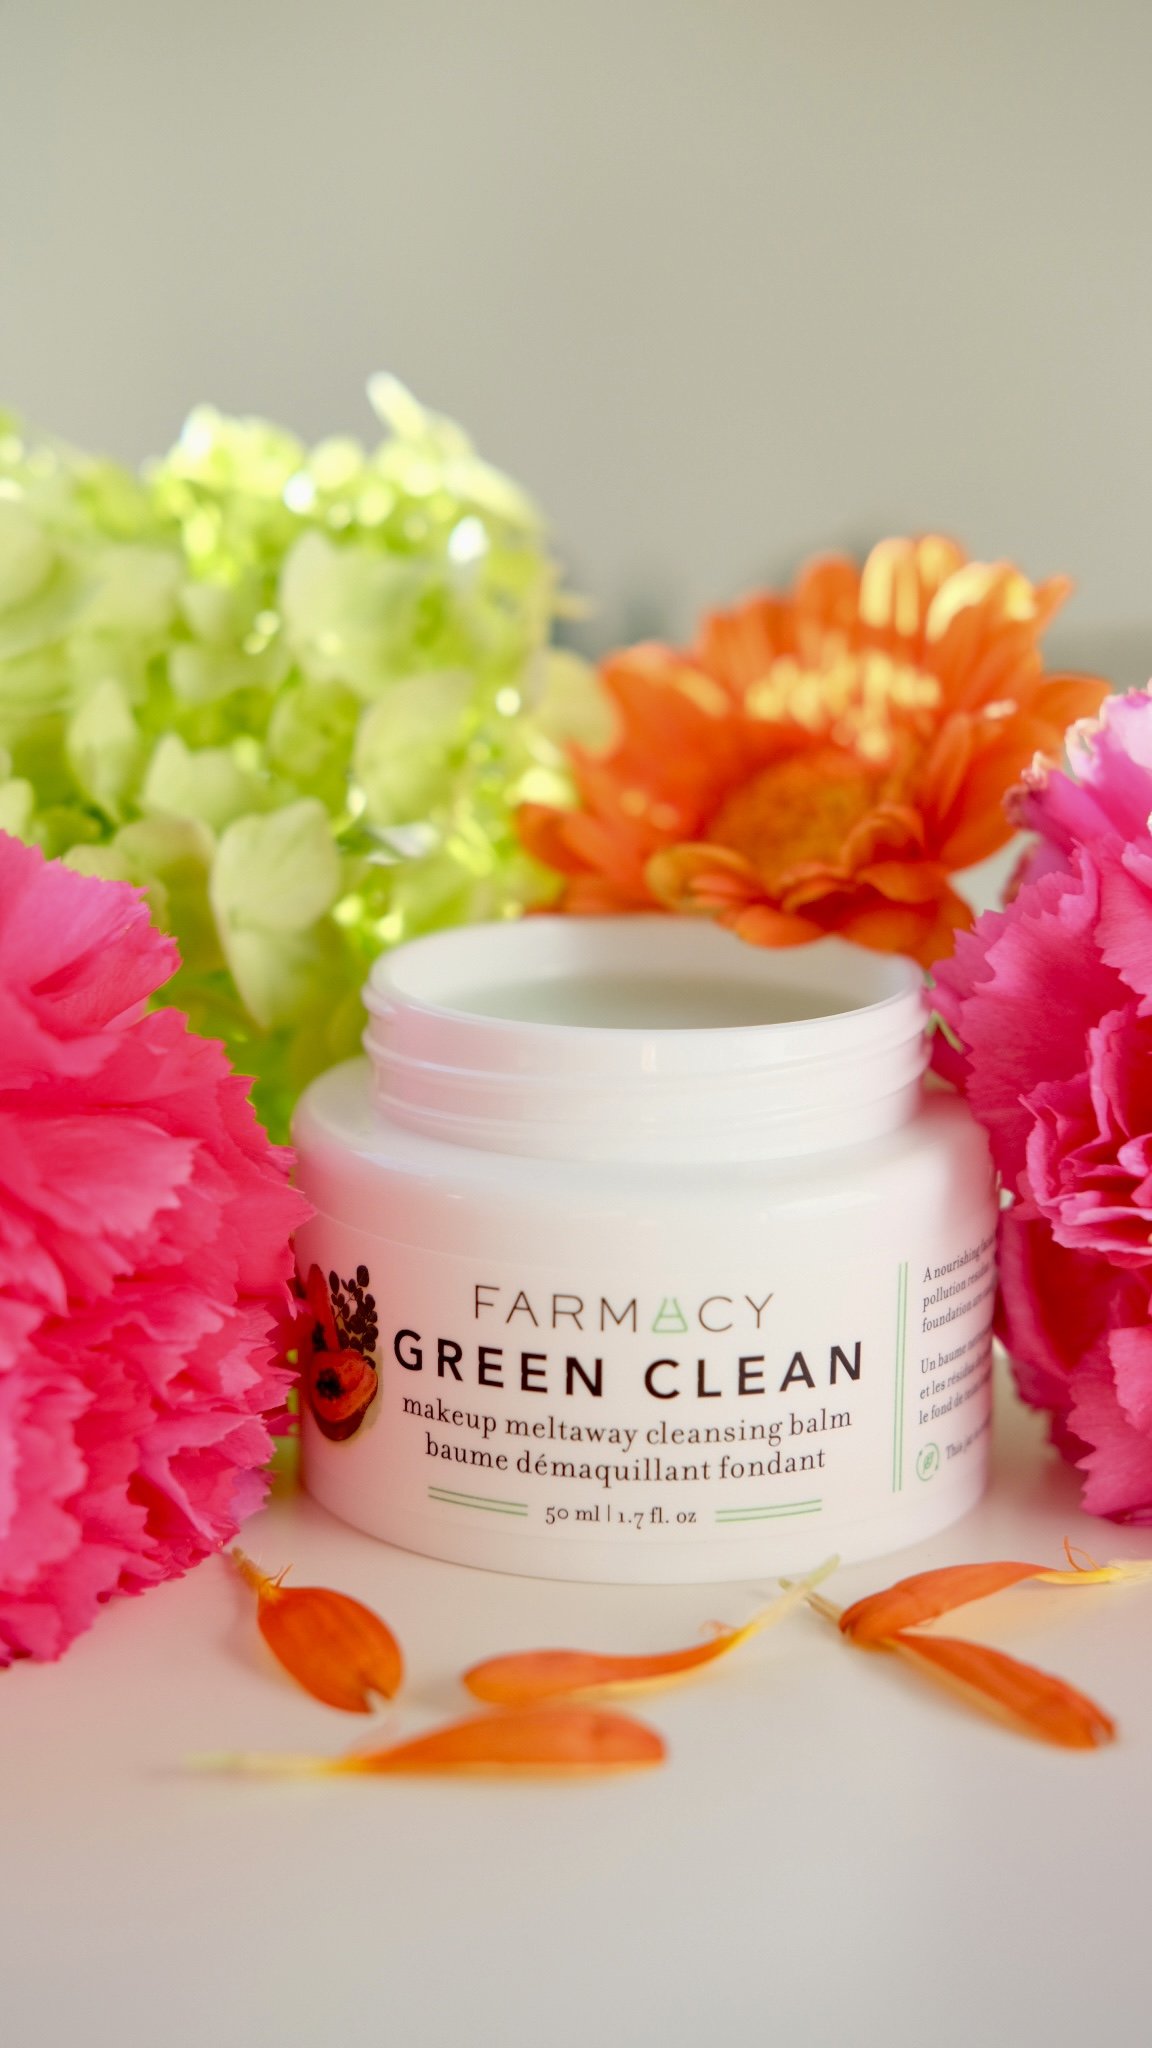 Farmacy Green Clean Cleansing Balm Review and Farmacy Beauty Coupon code